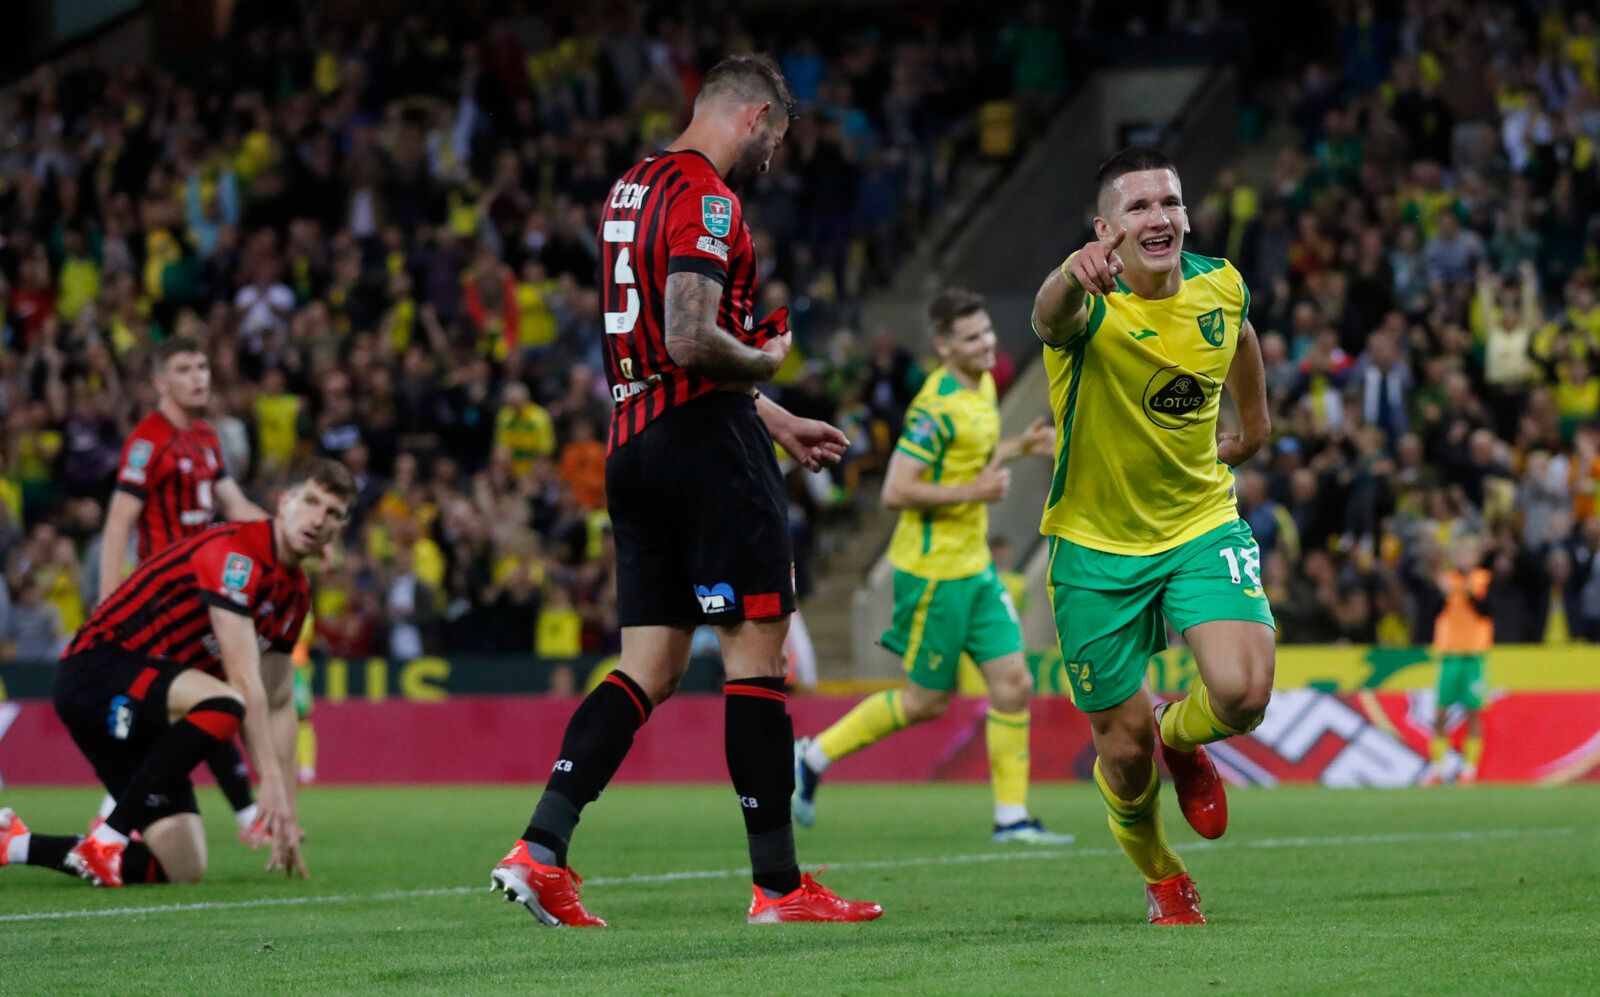 Soccer - England - Carabao Cup Second Round - Norwich City v AFC Bournemouth - Carrow Road, Norwich, Britain - August 24, 2021 Norwich City's Christos Tzolis celebrates scoring their fifth goal Action Images via Reuters/Matthew Childs